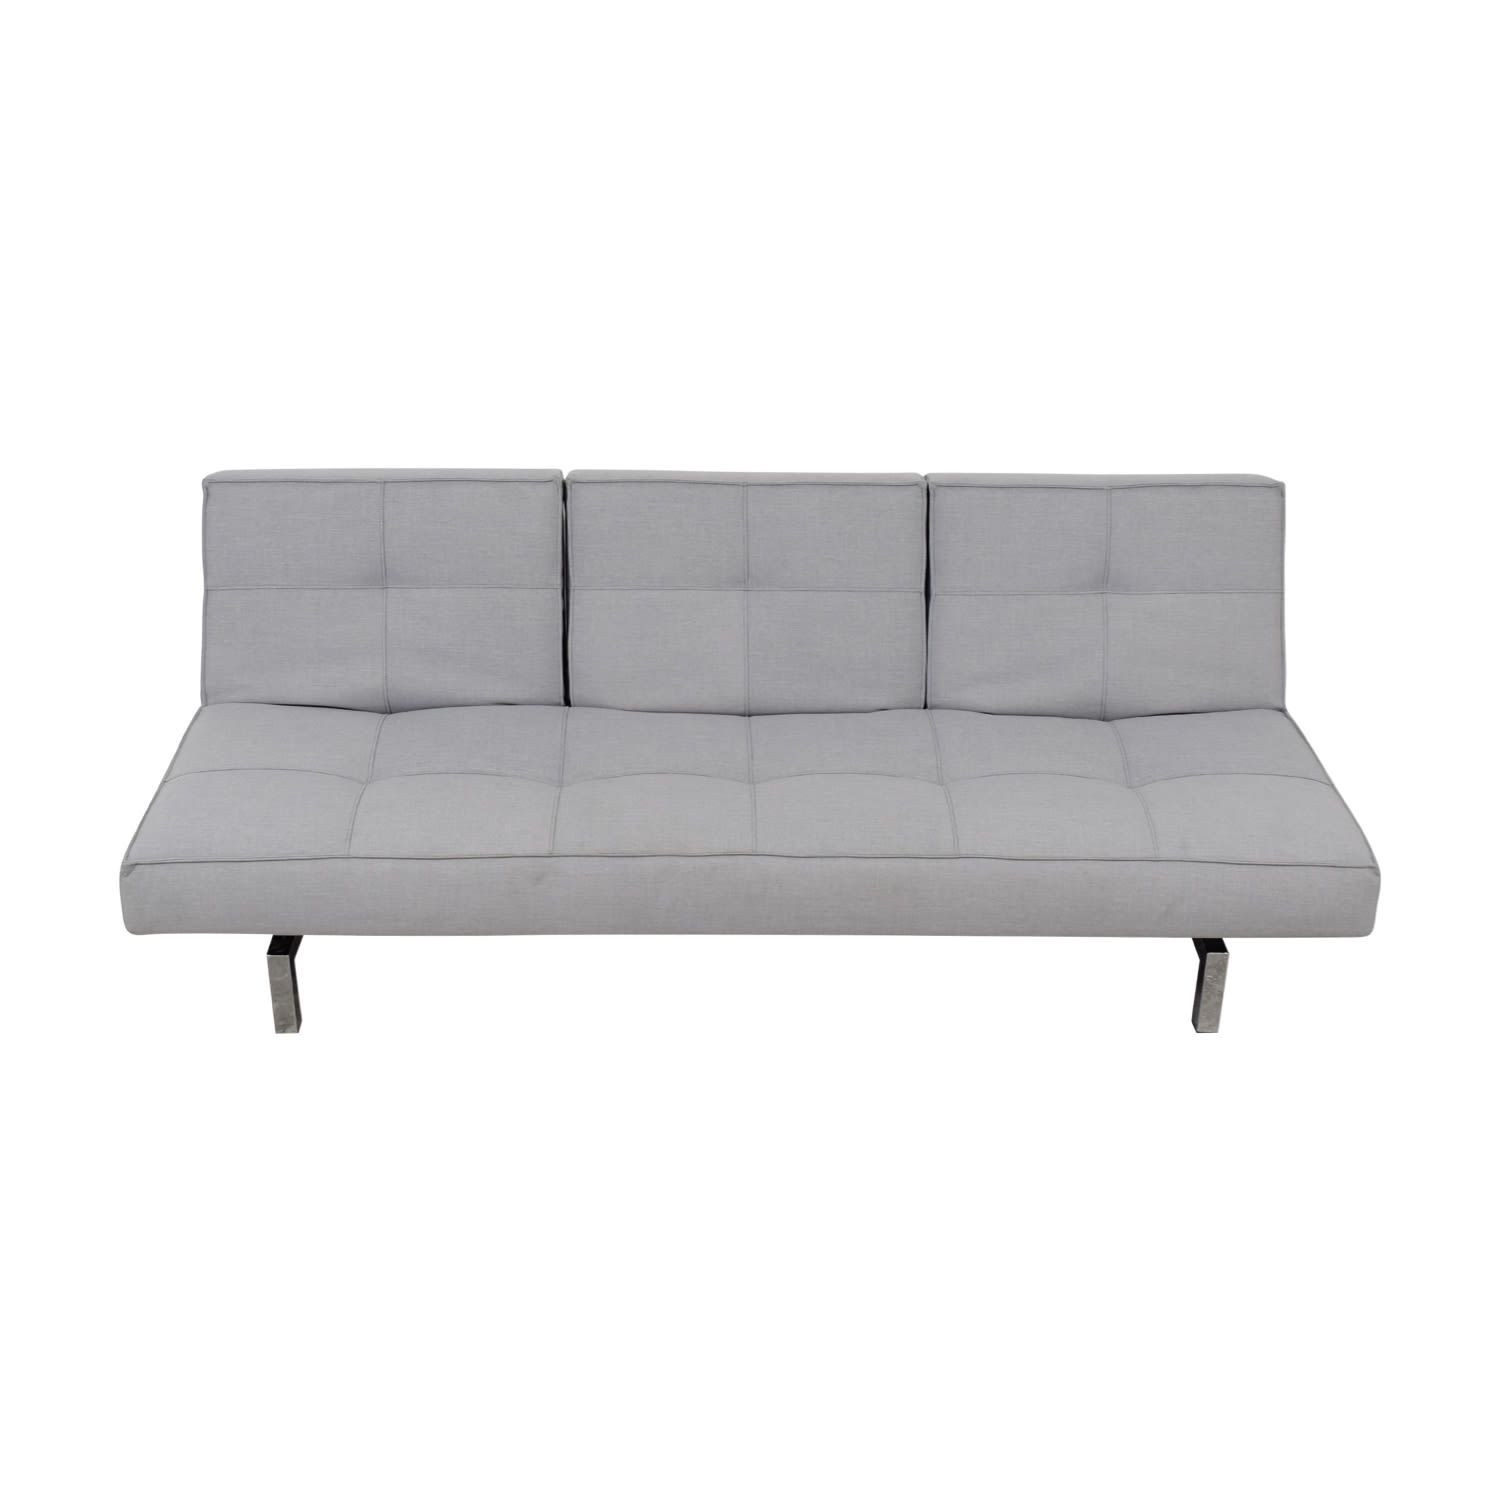 Innovation Convertible Grey Tufted Sleeper Sofa | 42% Off | Kaiyo For Tufted Convertible Sleeper Sofas (View 14 of 15)